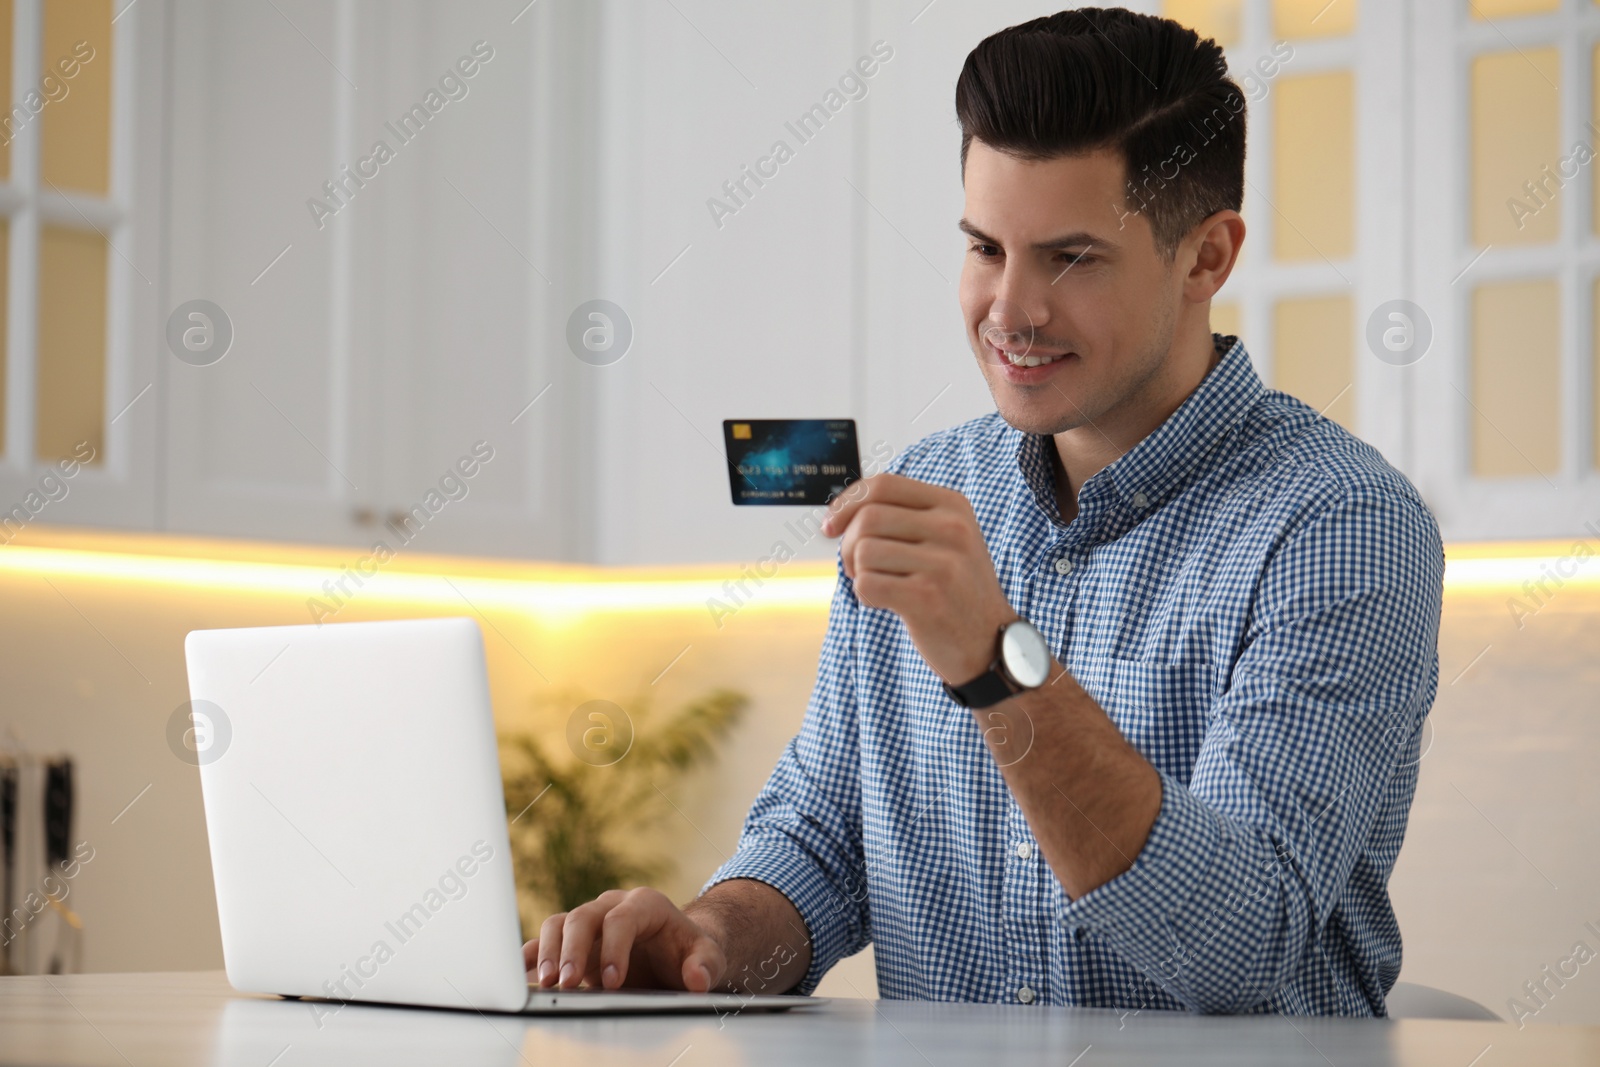 Photo of Man using laptop and credit card for online payment at table in kitchen